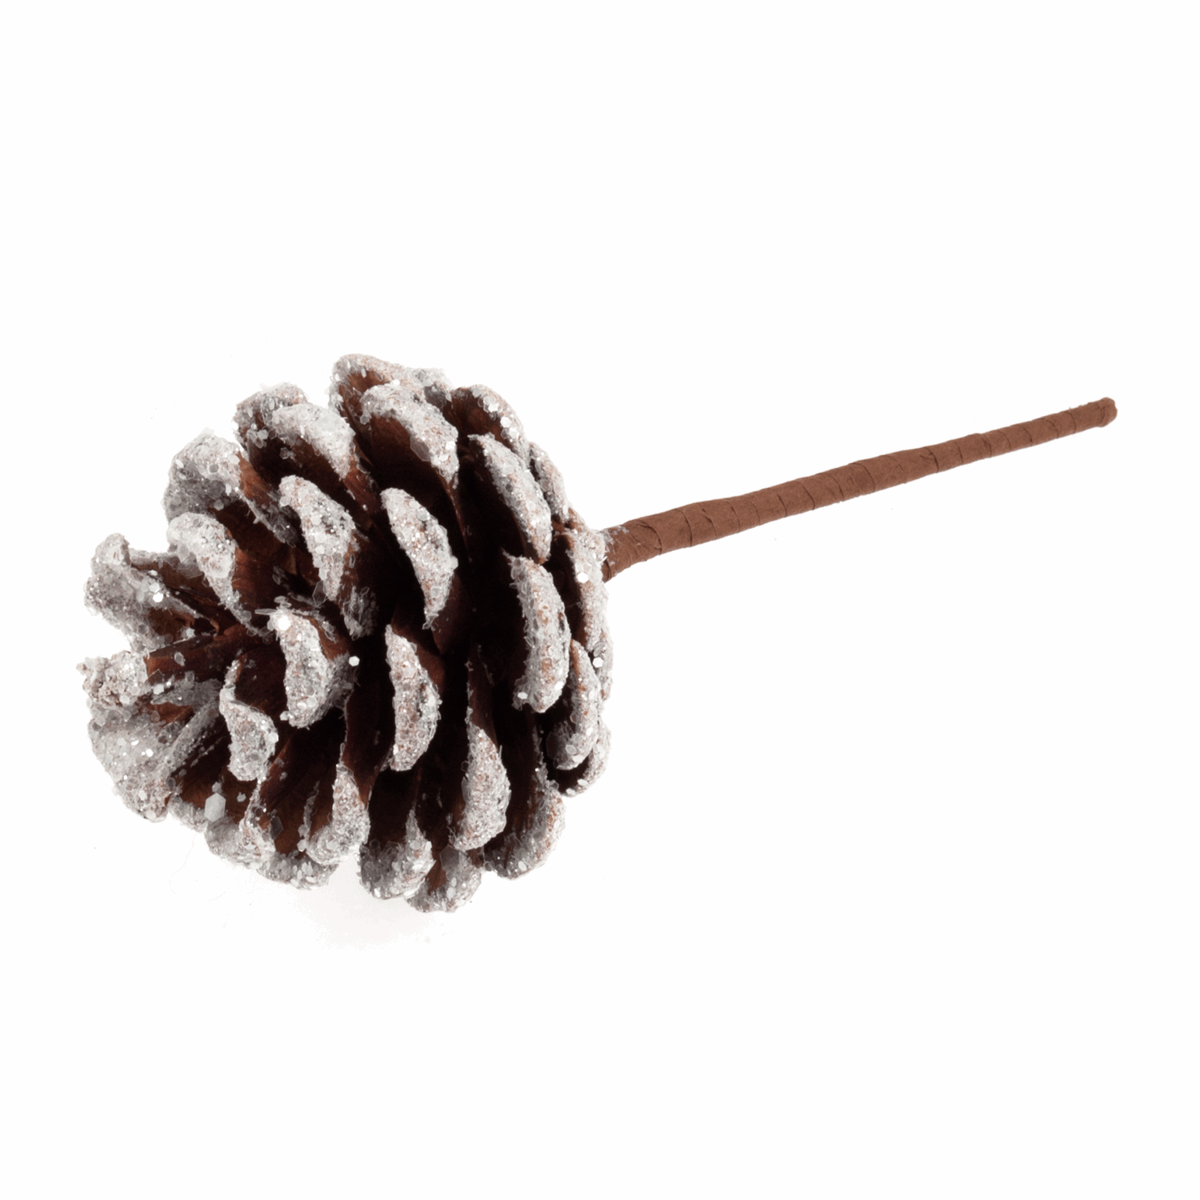 Snow Frosted Pinecone on a Stick (1 Piece)